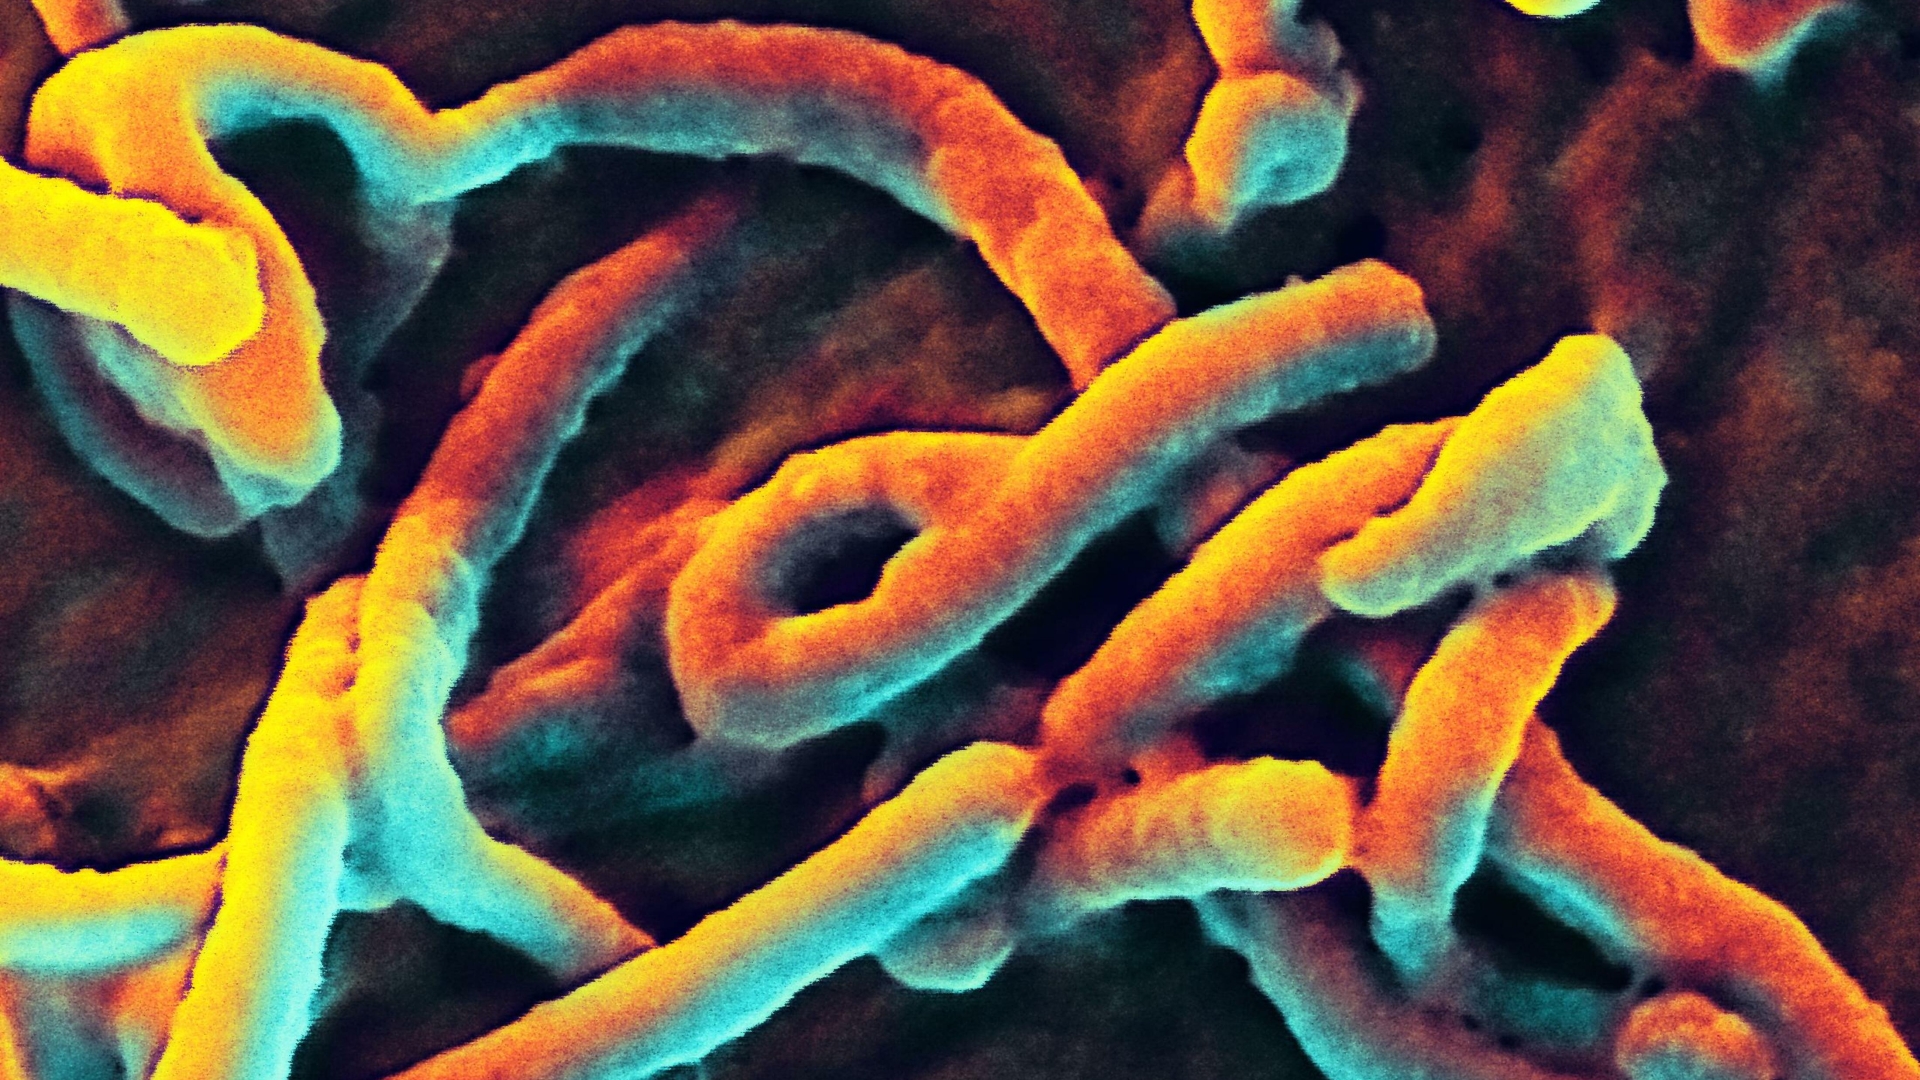 Potential case of deadly Ebola being probed after hospital clinic 'locked down'